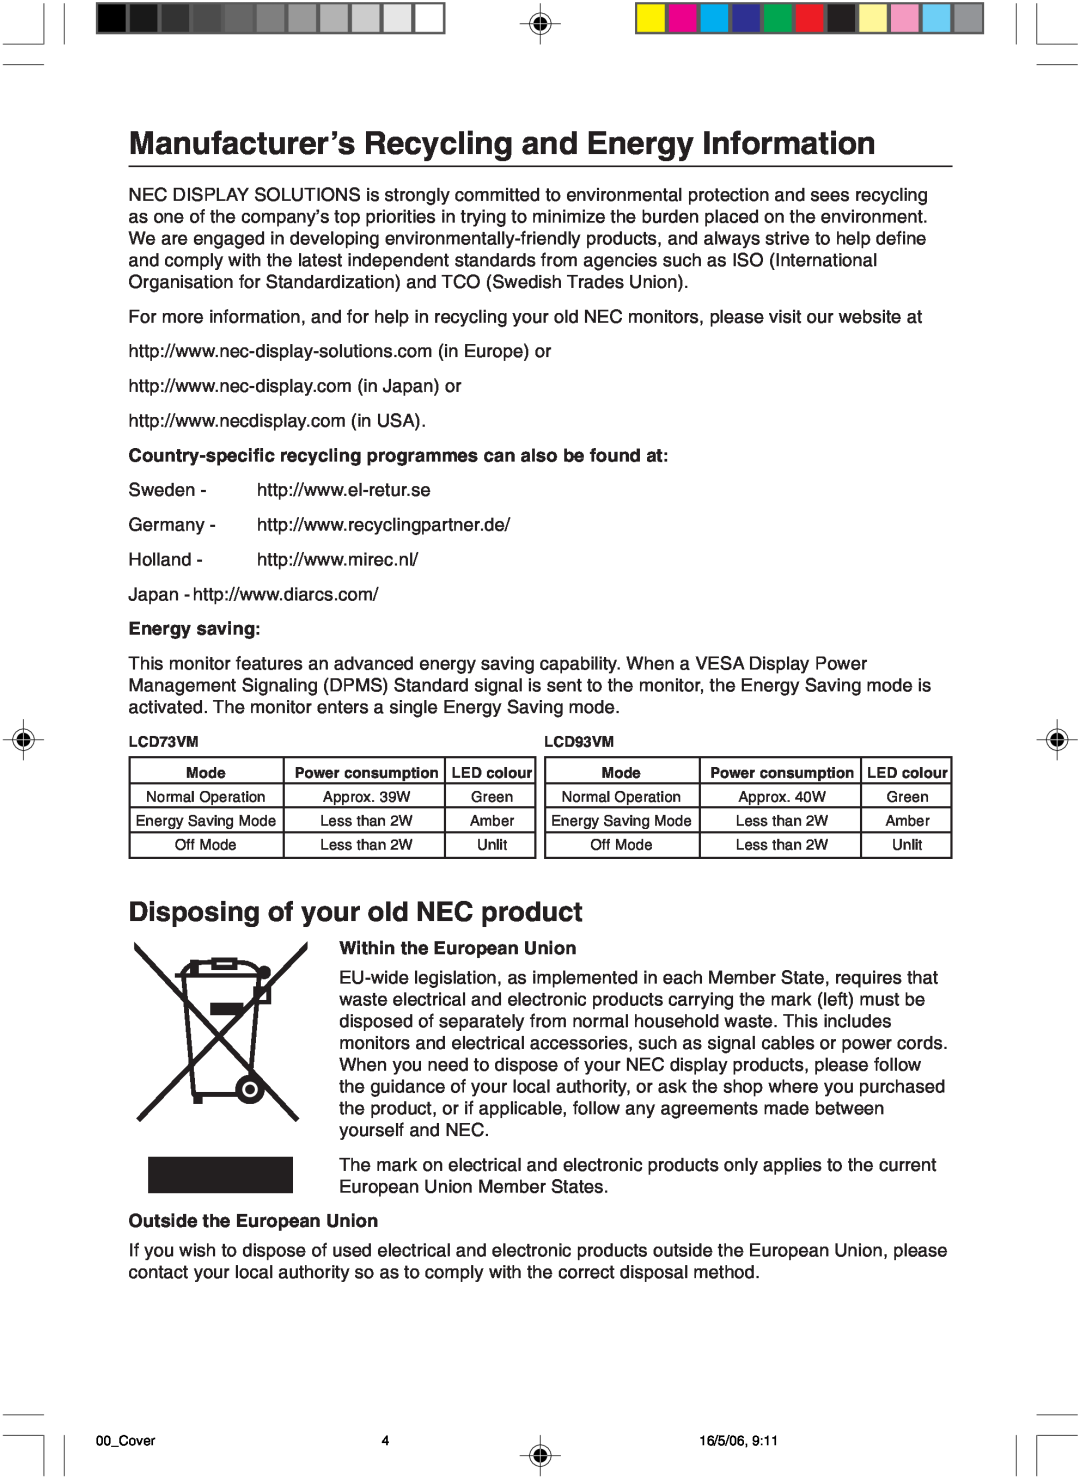 NEC LCD73VM user manual Manufacturer’s Recycling and Energy Information, Energy saving, Within the European Union 